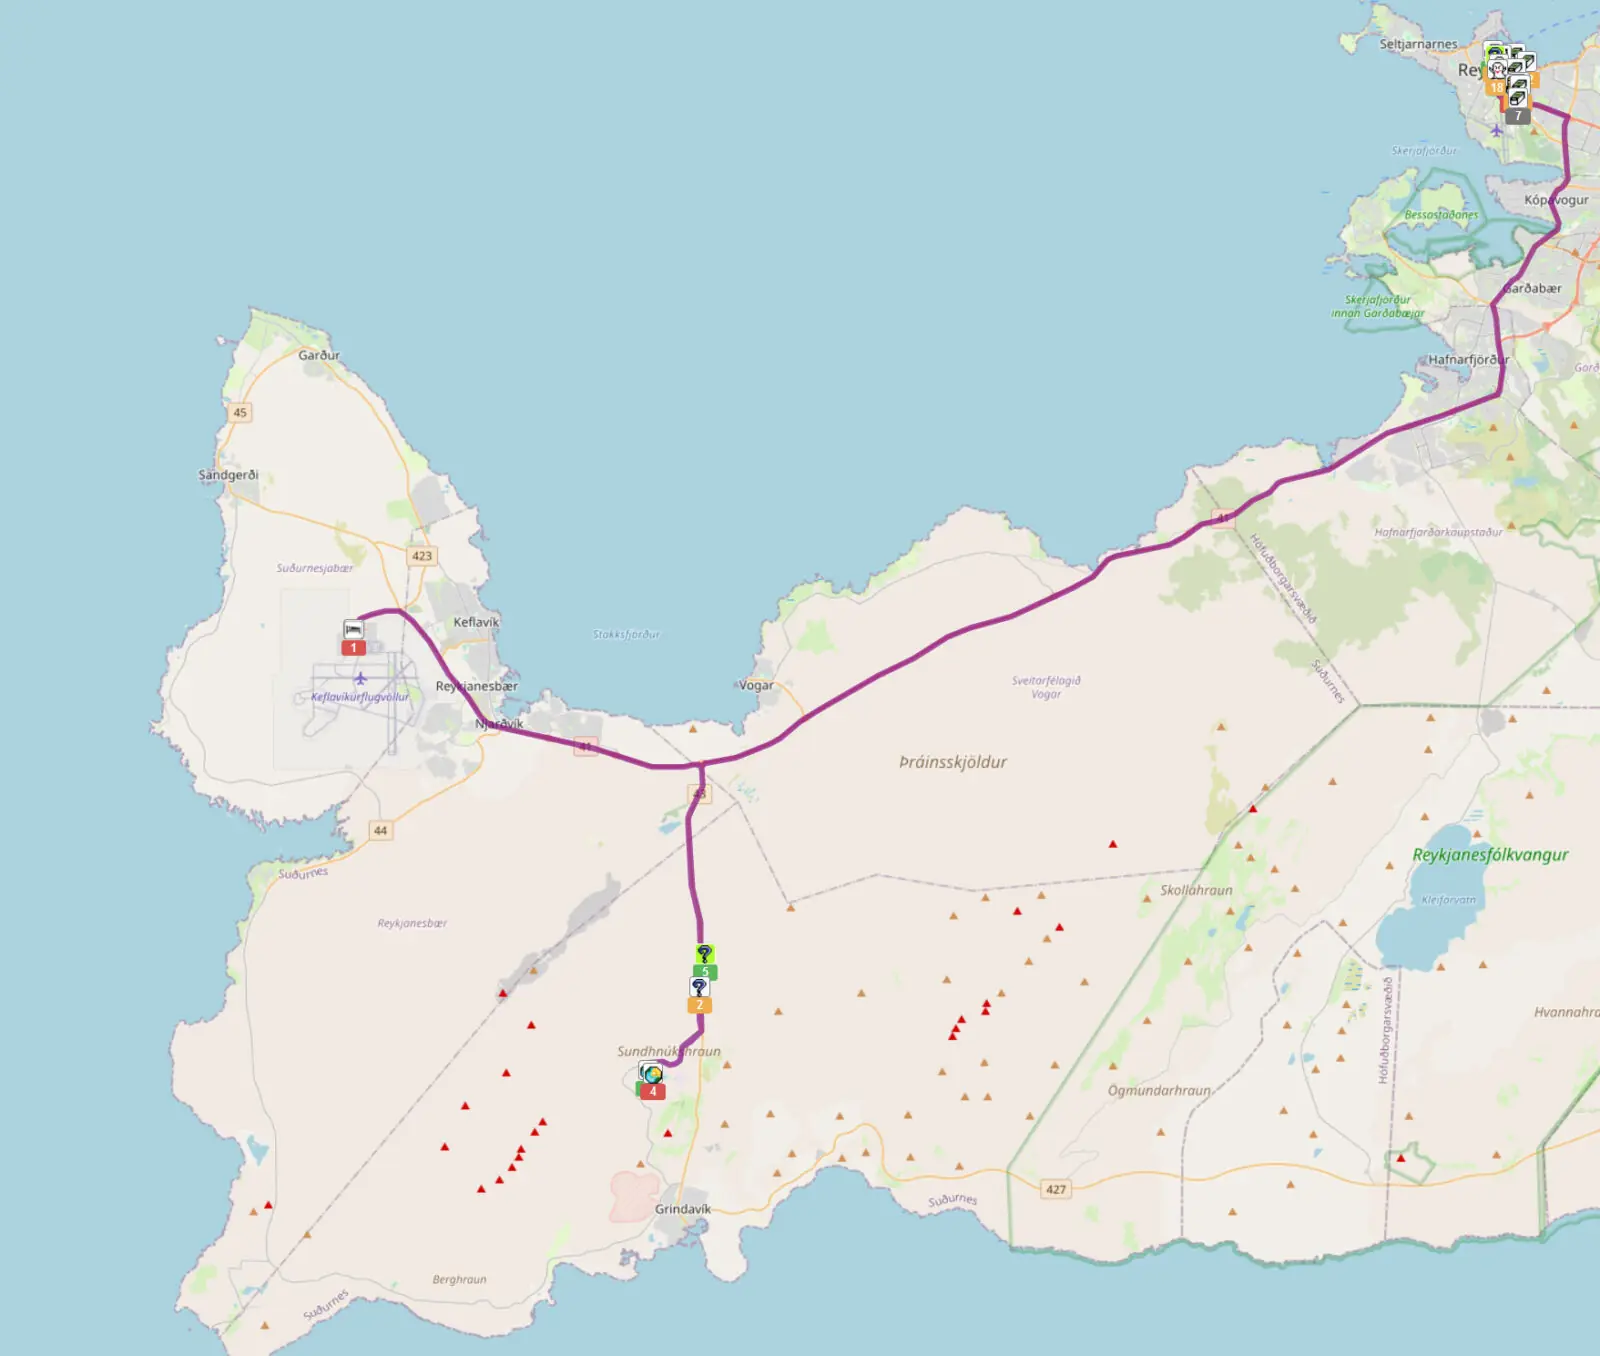 Map showing route from Keflavik airport, via Blue Lagoon (geocaches, currnetly) then Reykjavik where I"ll overnight.